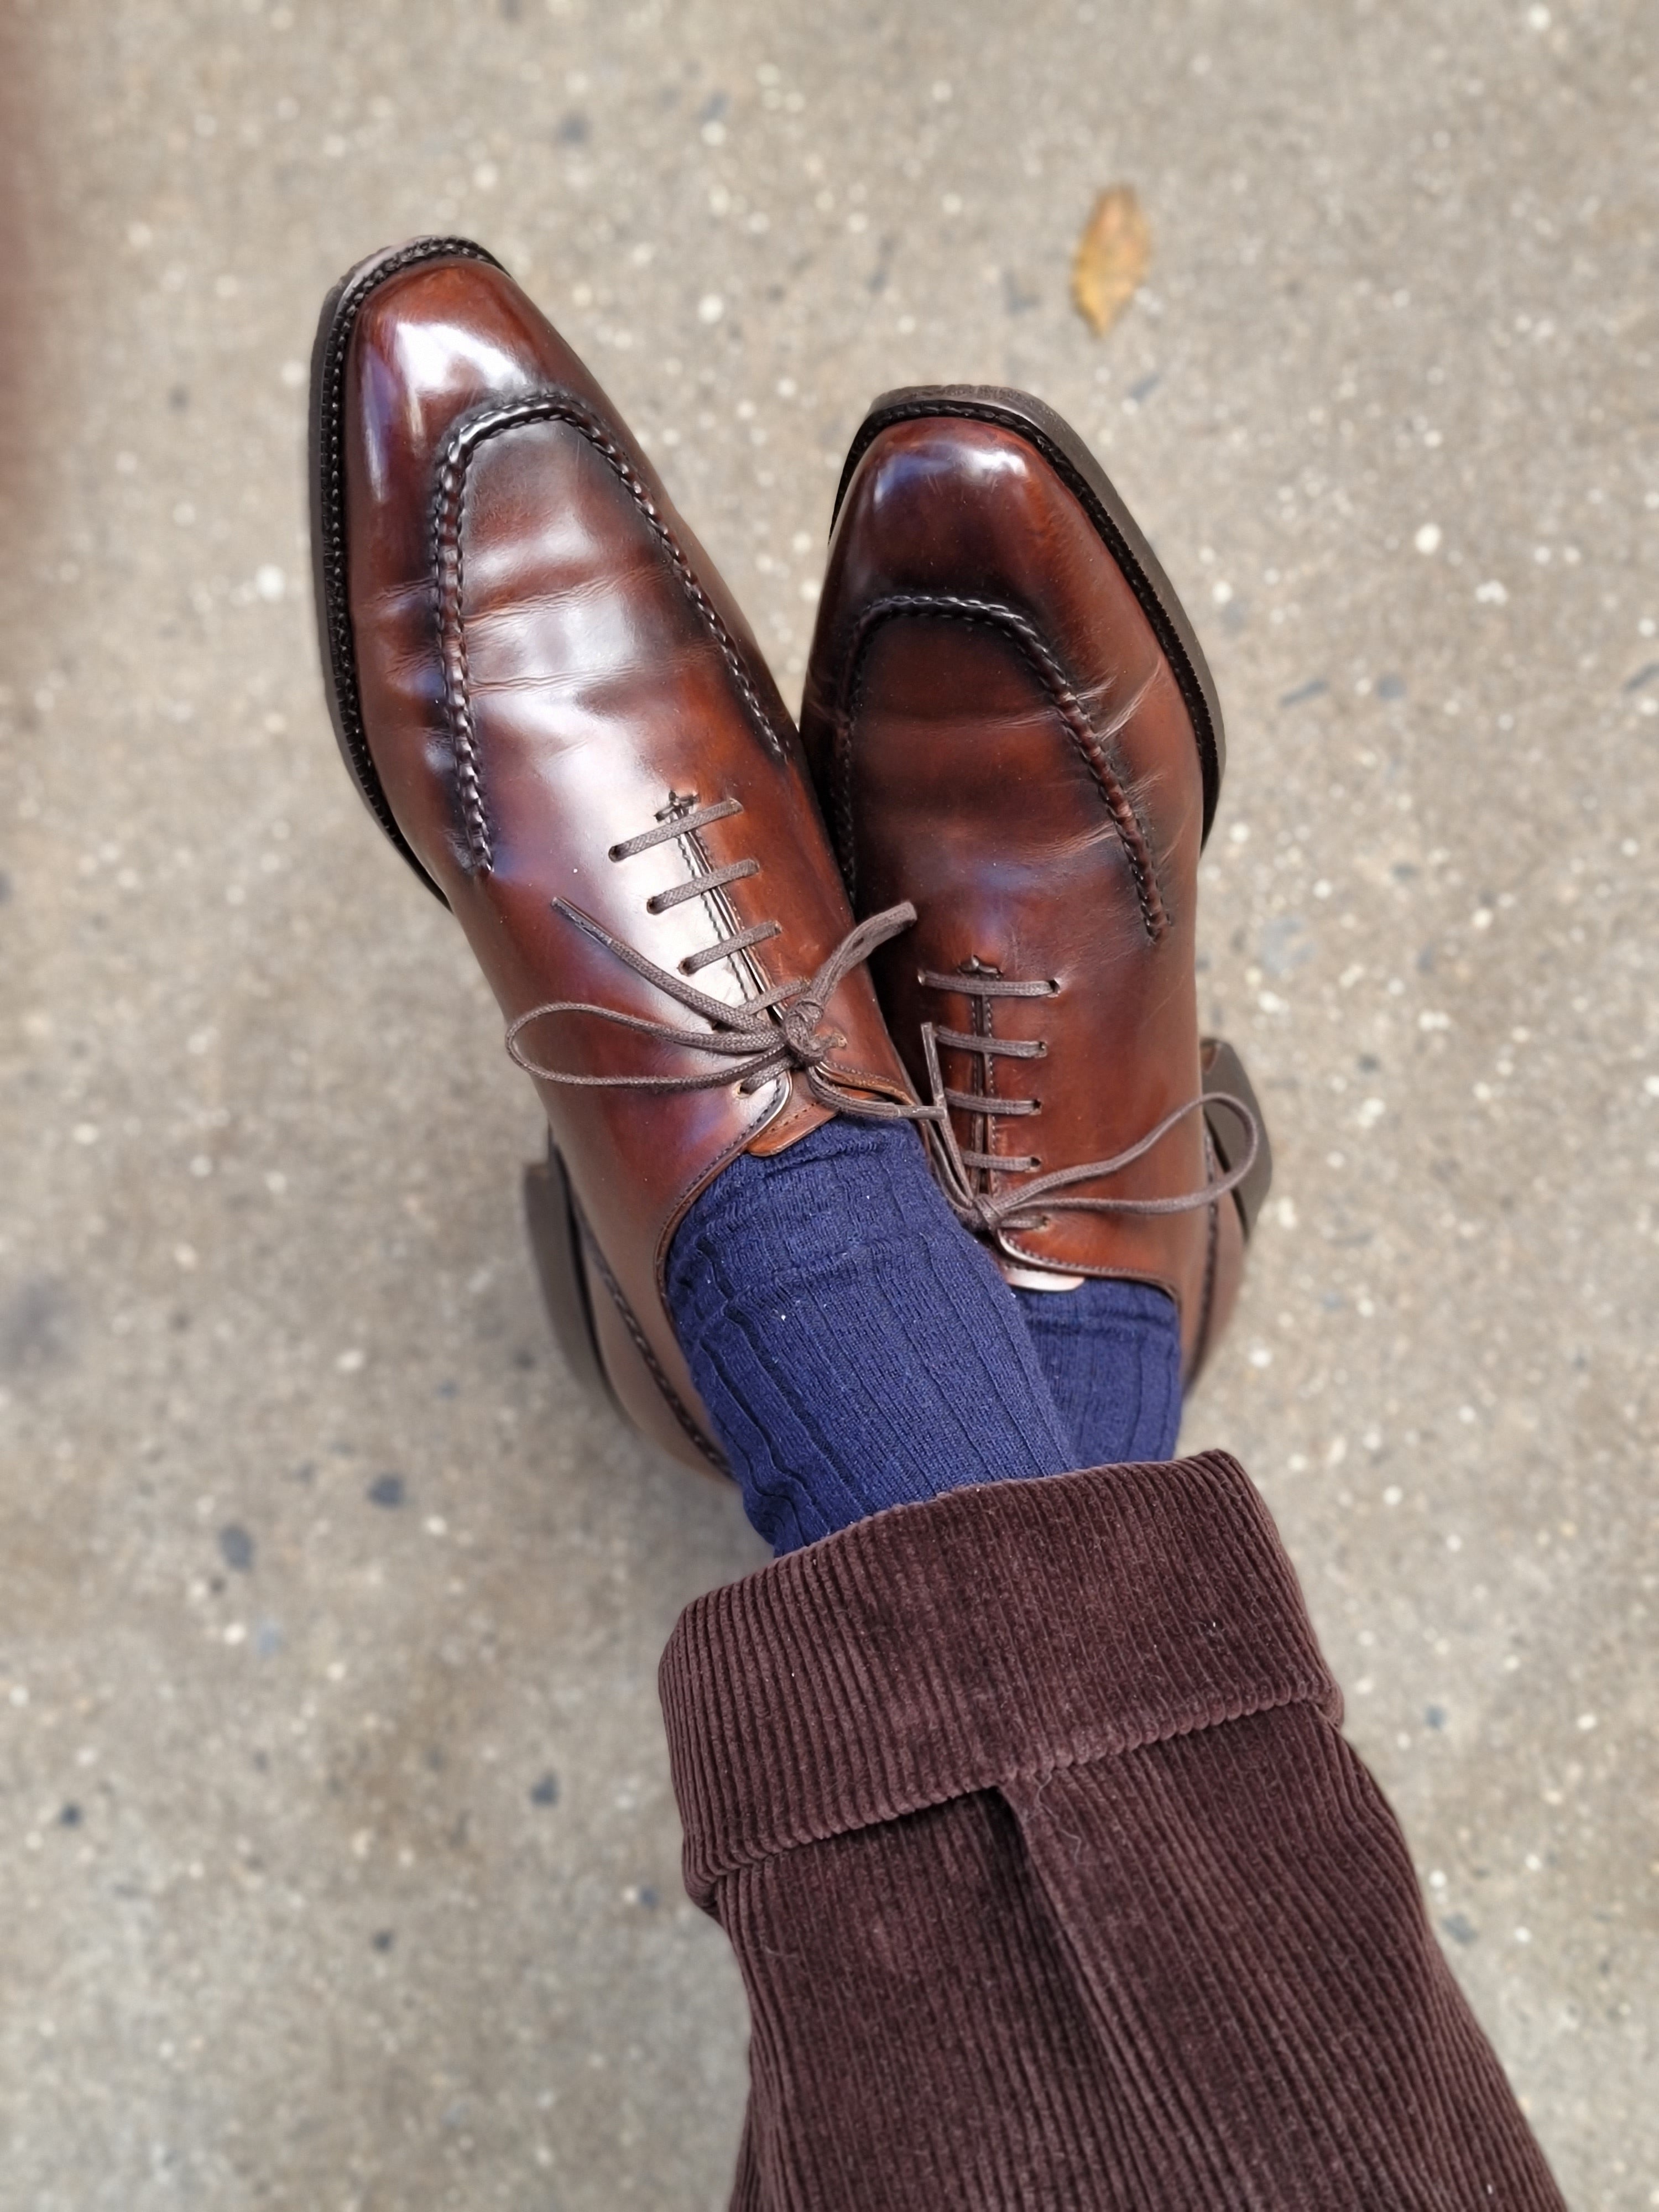 Whittier - MTO - Shaded Brown Calf - LPB Last - Single Leather Sole